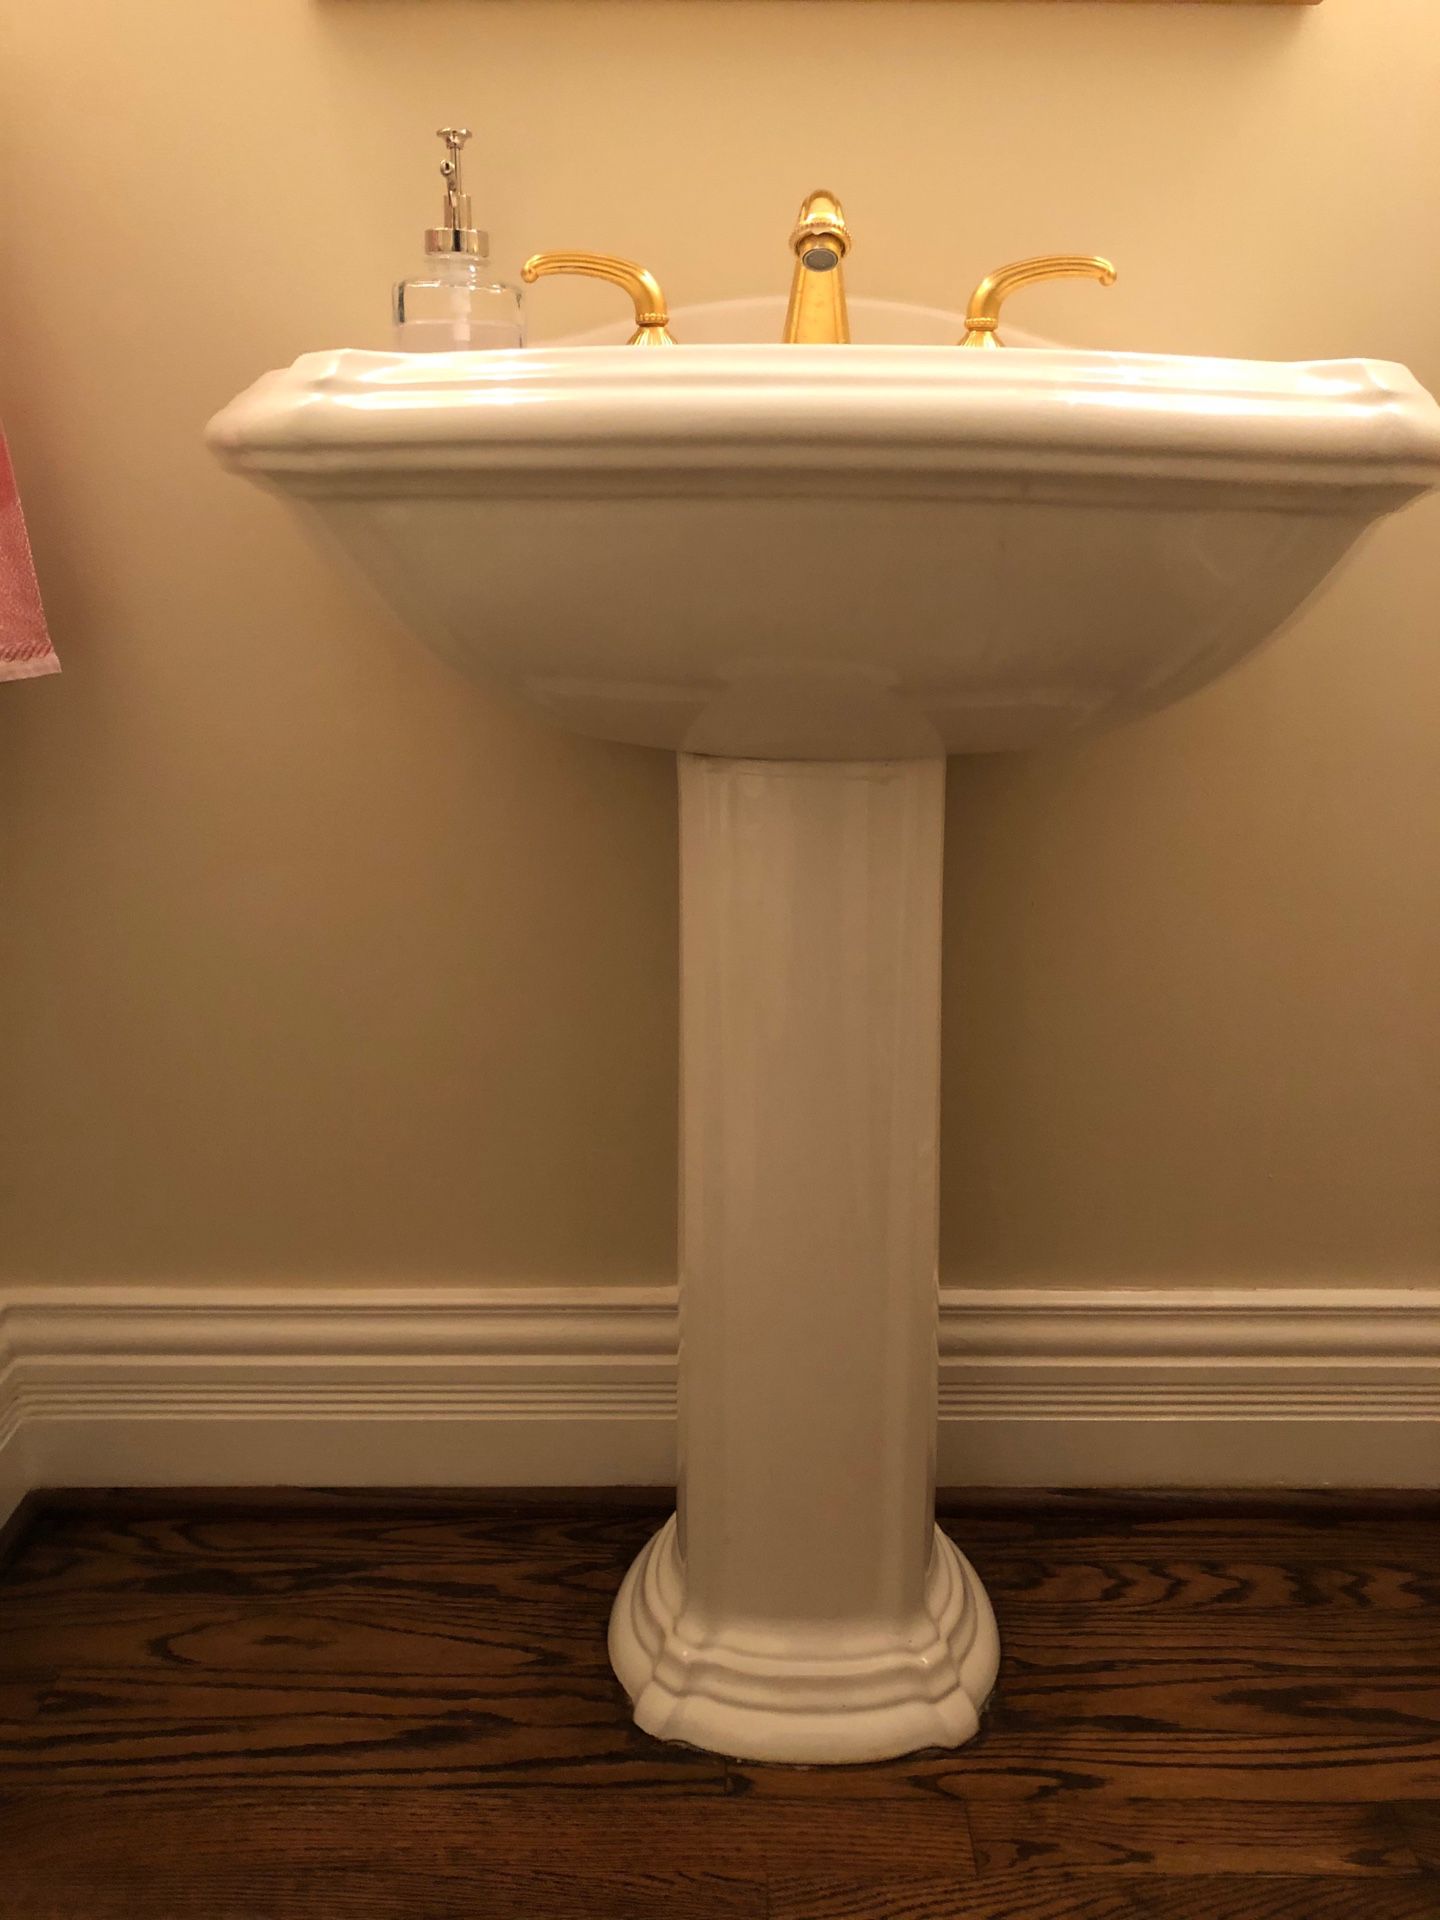 Pedestal sink with faucet combo